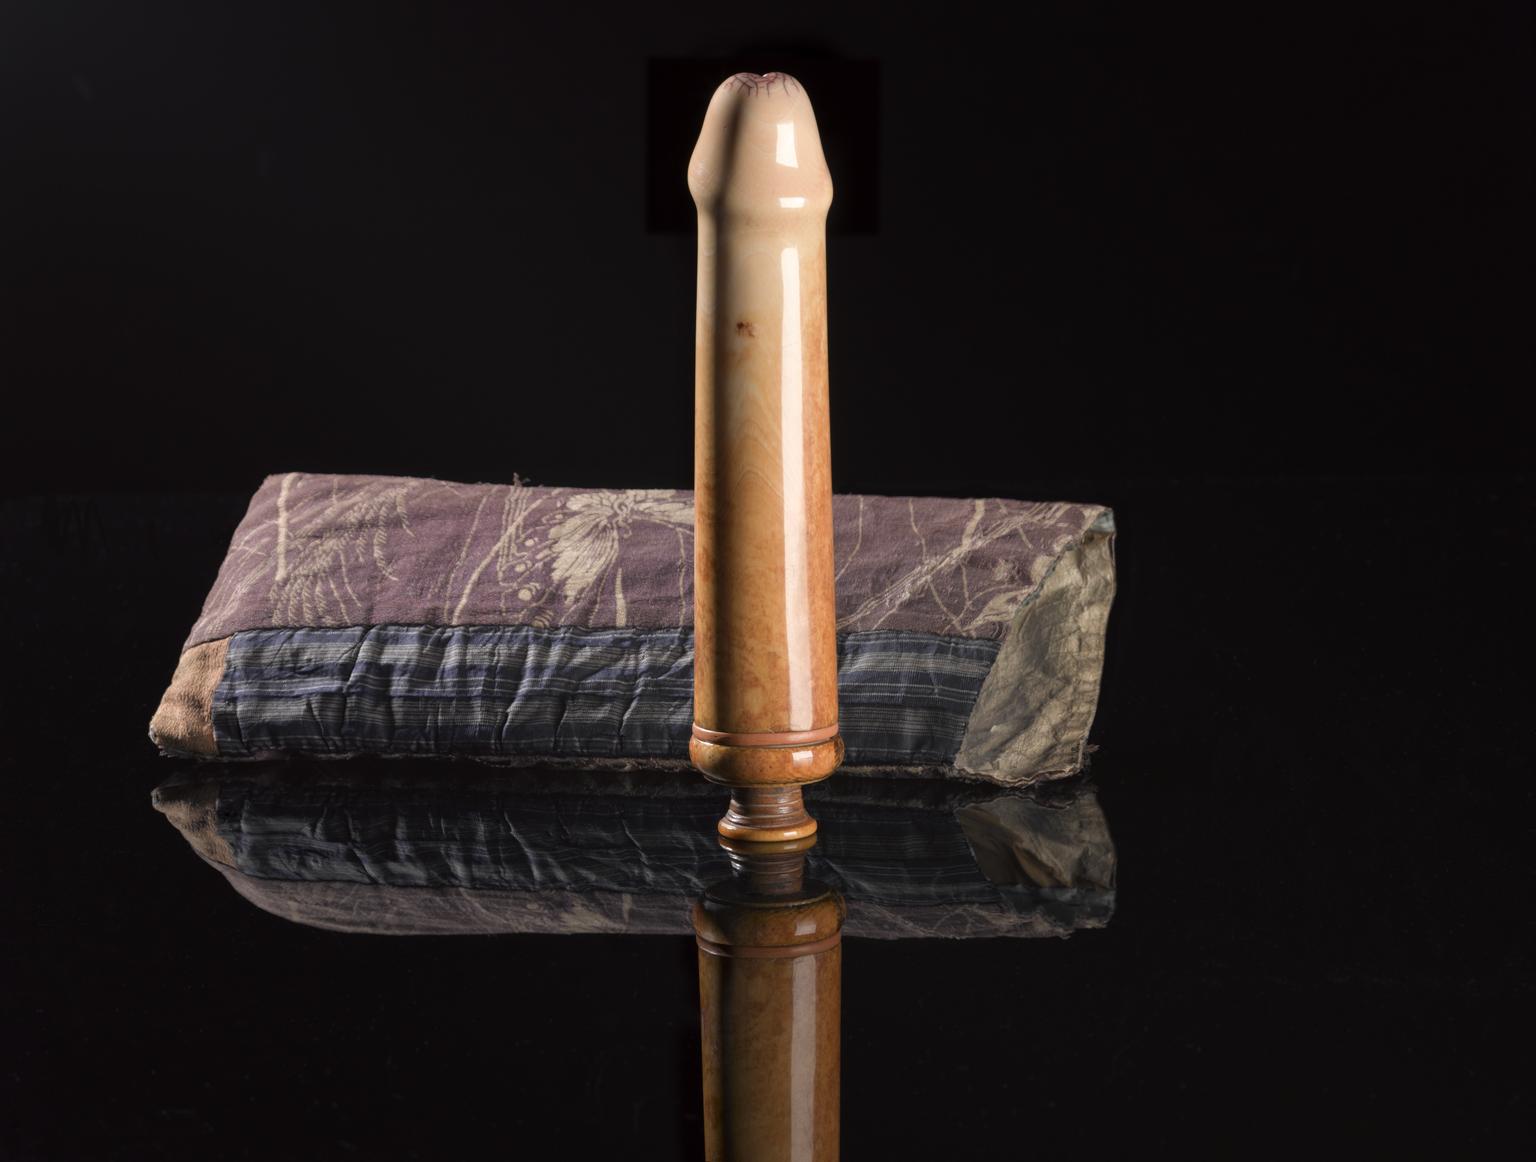 “Ivory dildo, possibly French, 1701-1800.” A641108/1. Science Museum Group Collection.